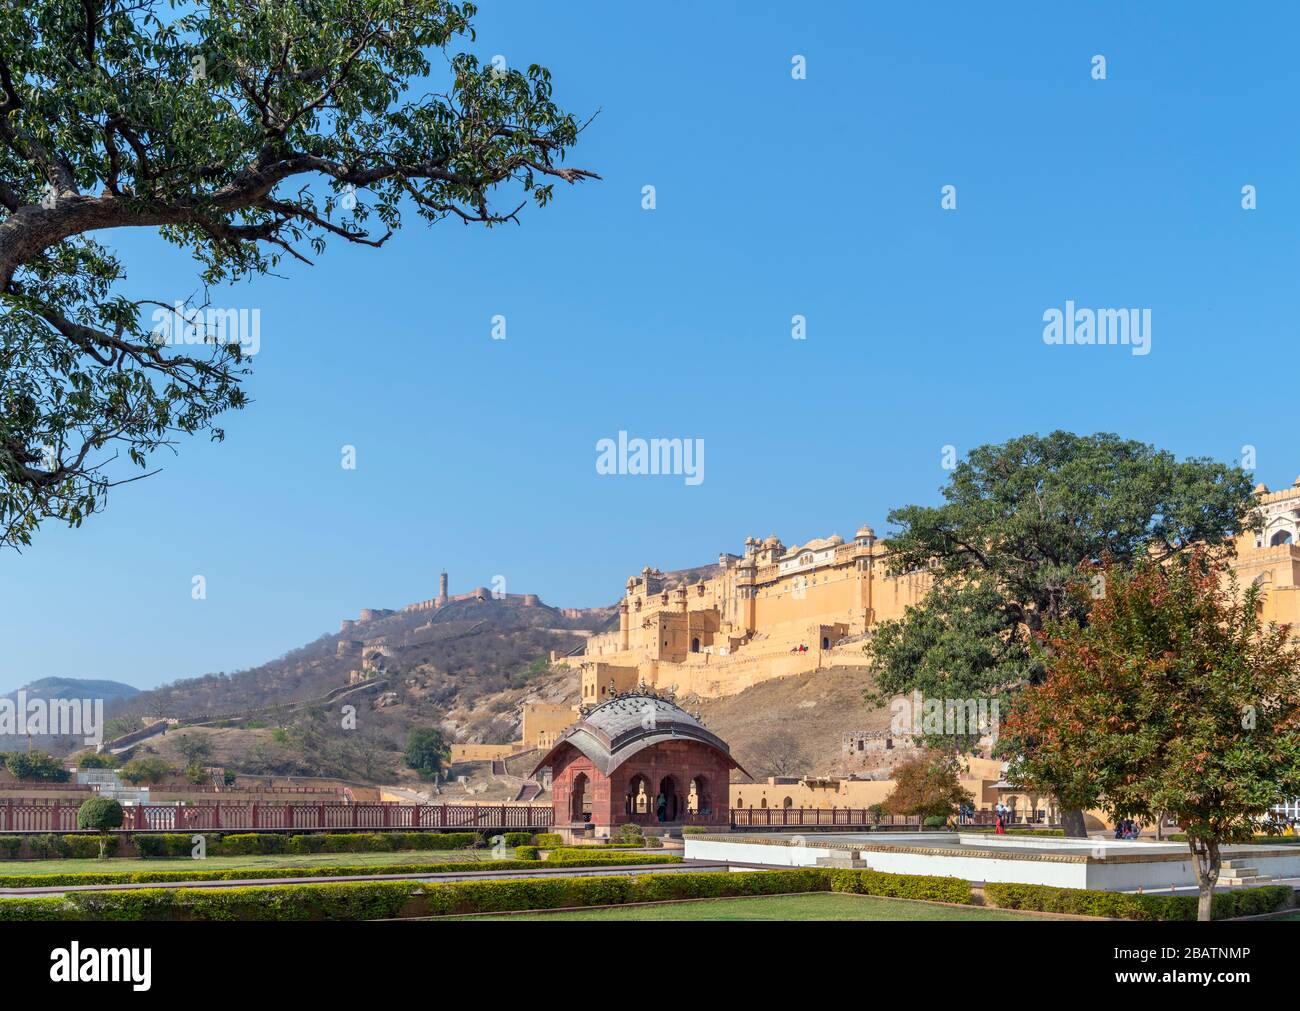 Amber Fort, Jaipur. The Amber Fort (Amer Fort) from Dil Aaram Bagh gardens with Jaigarh Fort behind, Jaipur, Rajasthan, India Stock Photo